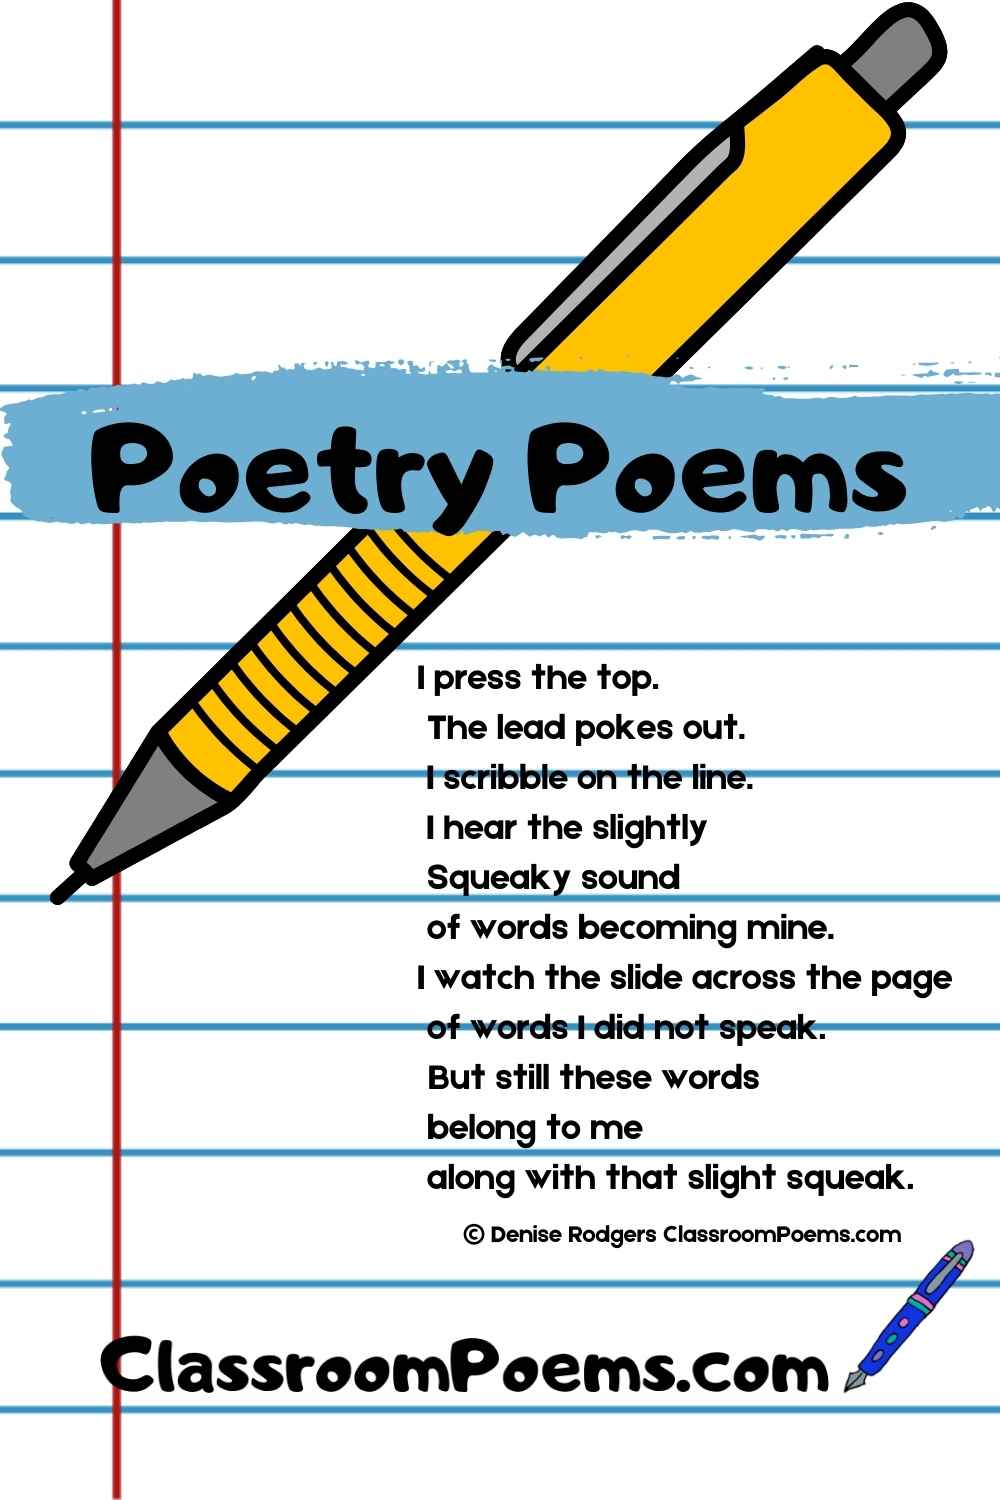 Poetry Poems for kids by Denise Rodgers on ClassroomPoems.com.